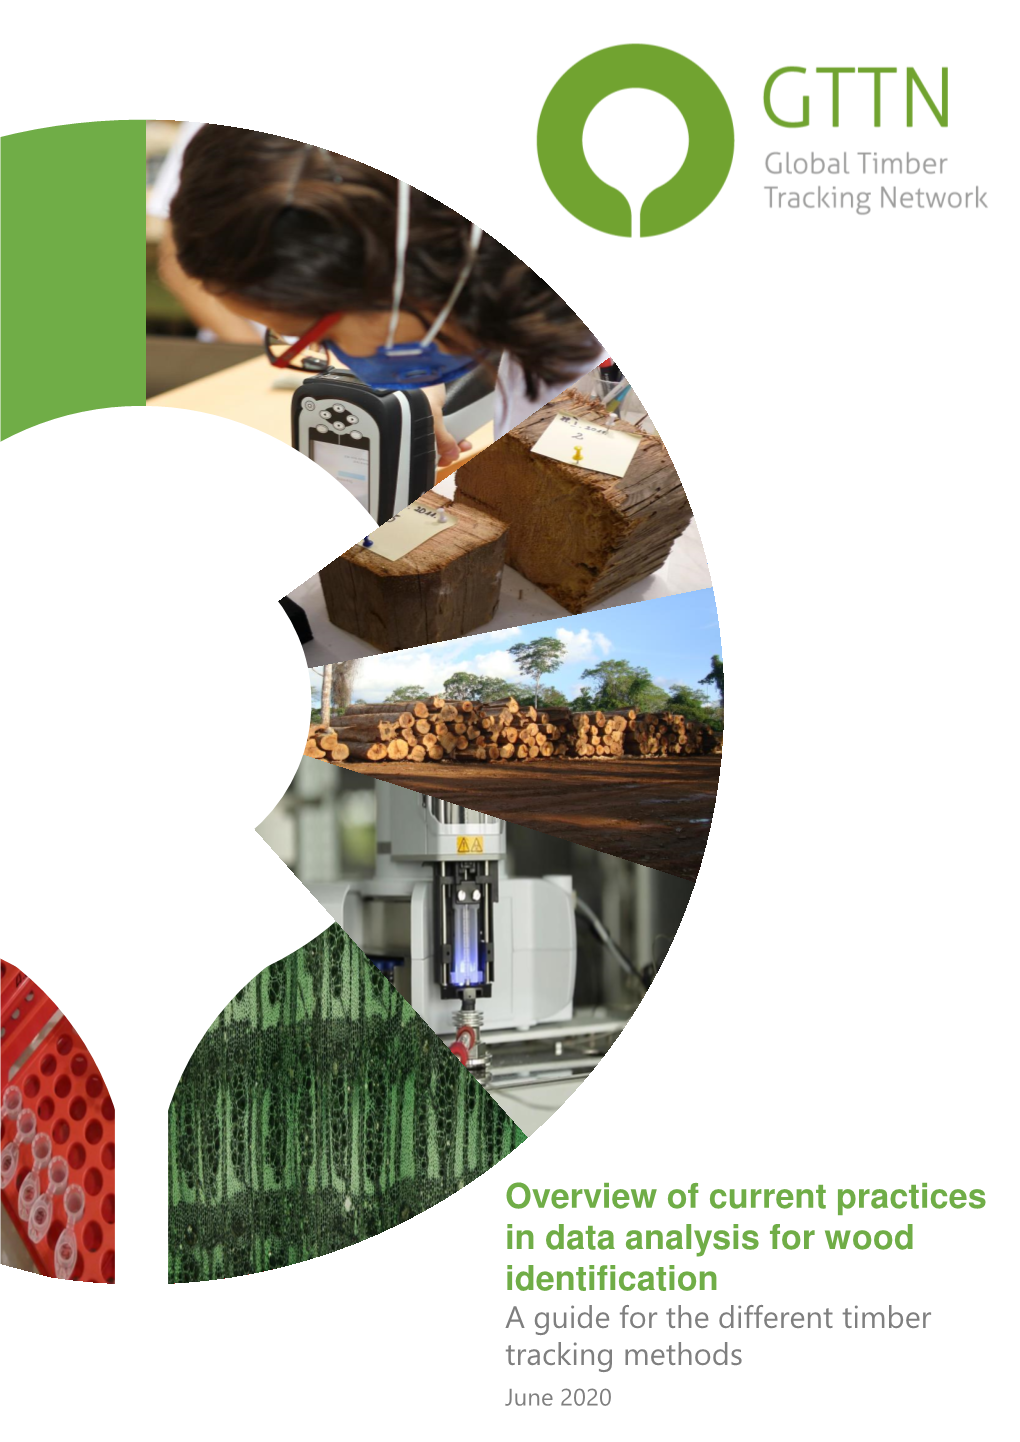 Overview of Current Practices in Data Analysis for Wood Identification a Guide for the Different Timber Tracking Methods June 2020